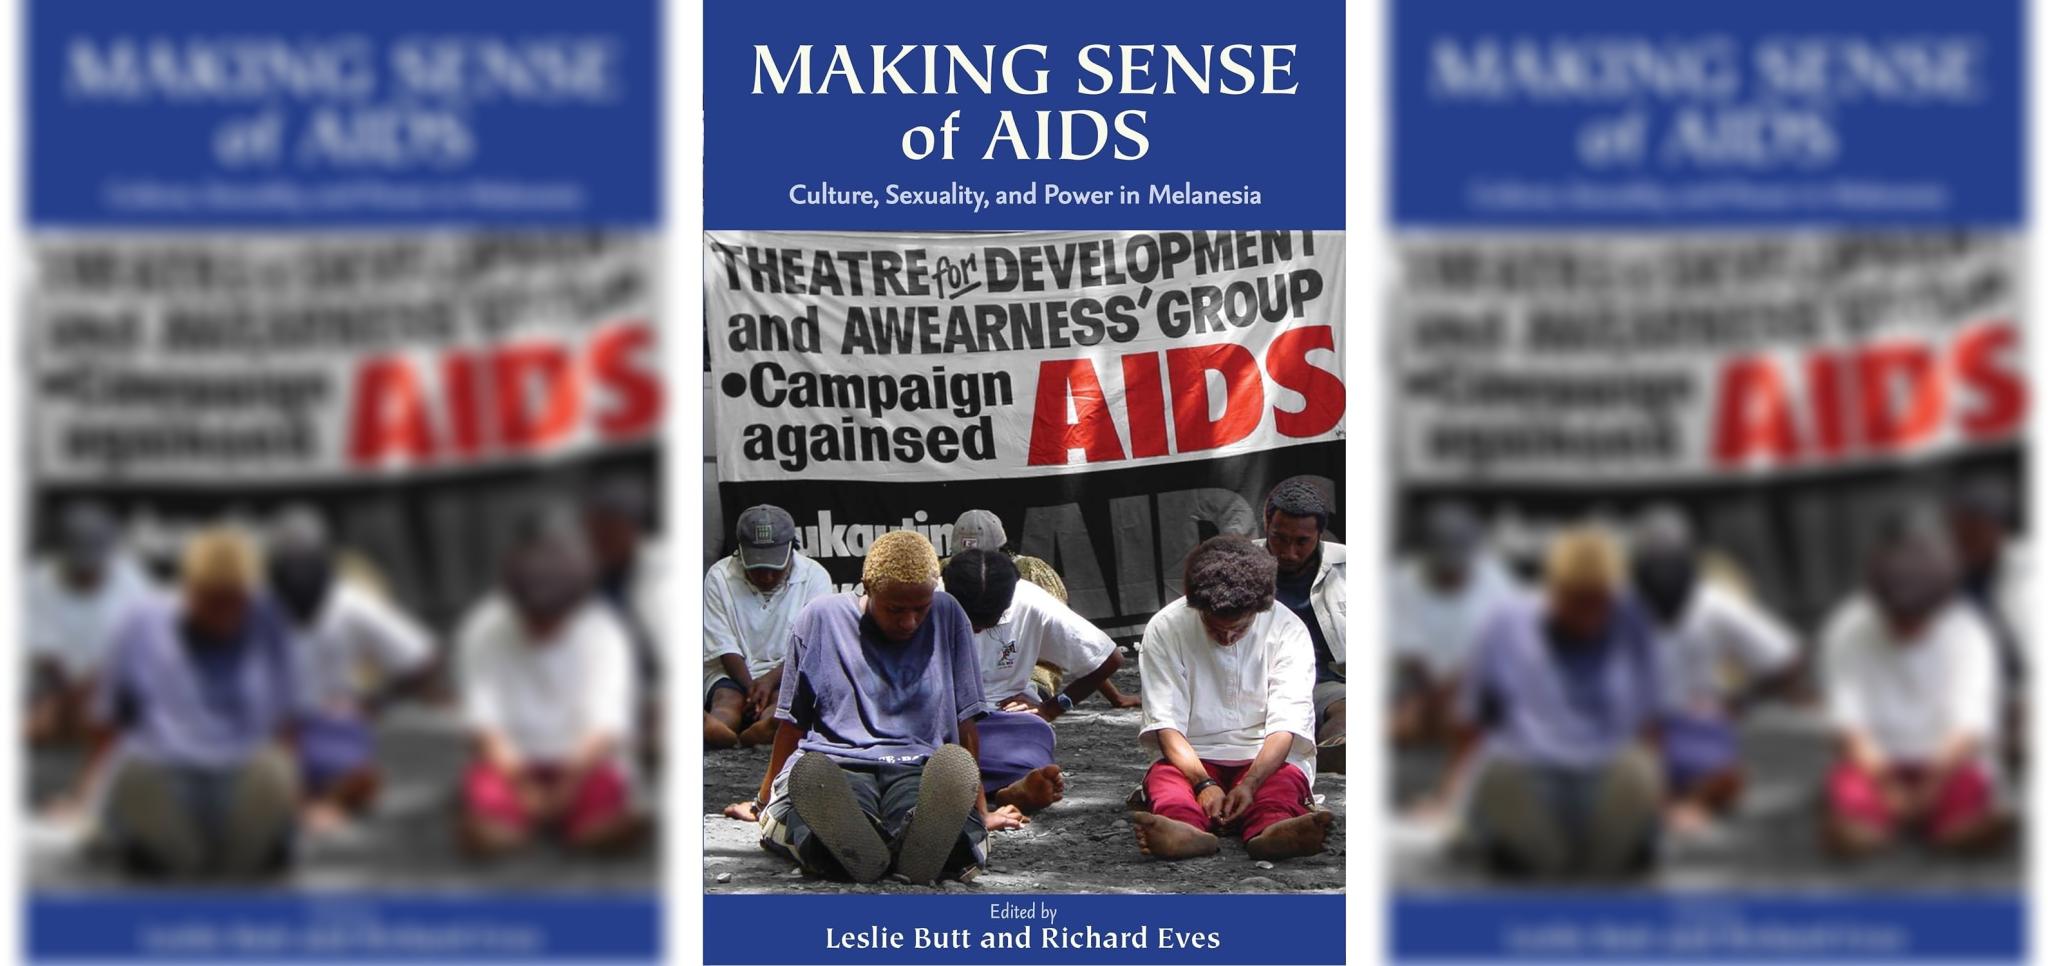 Making Sense of AIDS: Culture, Sexuality, and Power in Melanesia